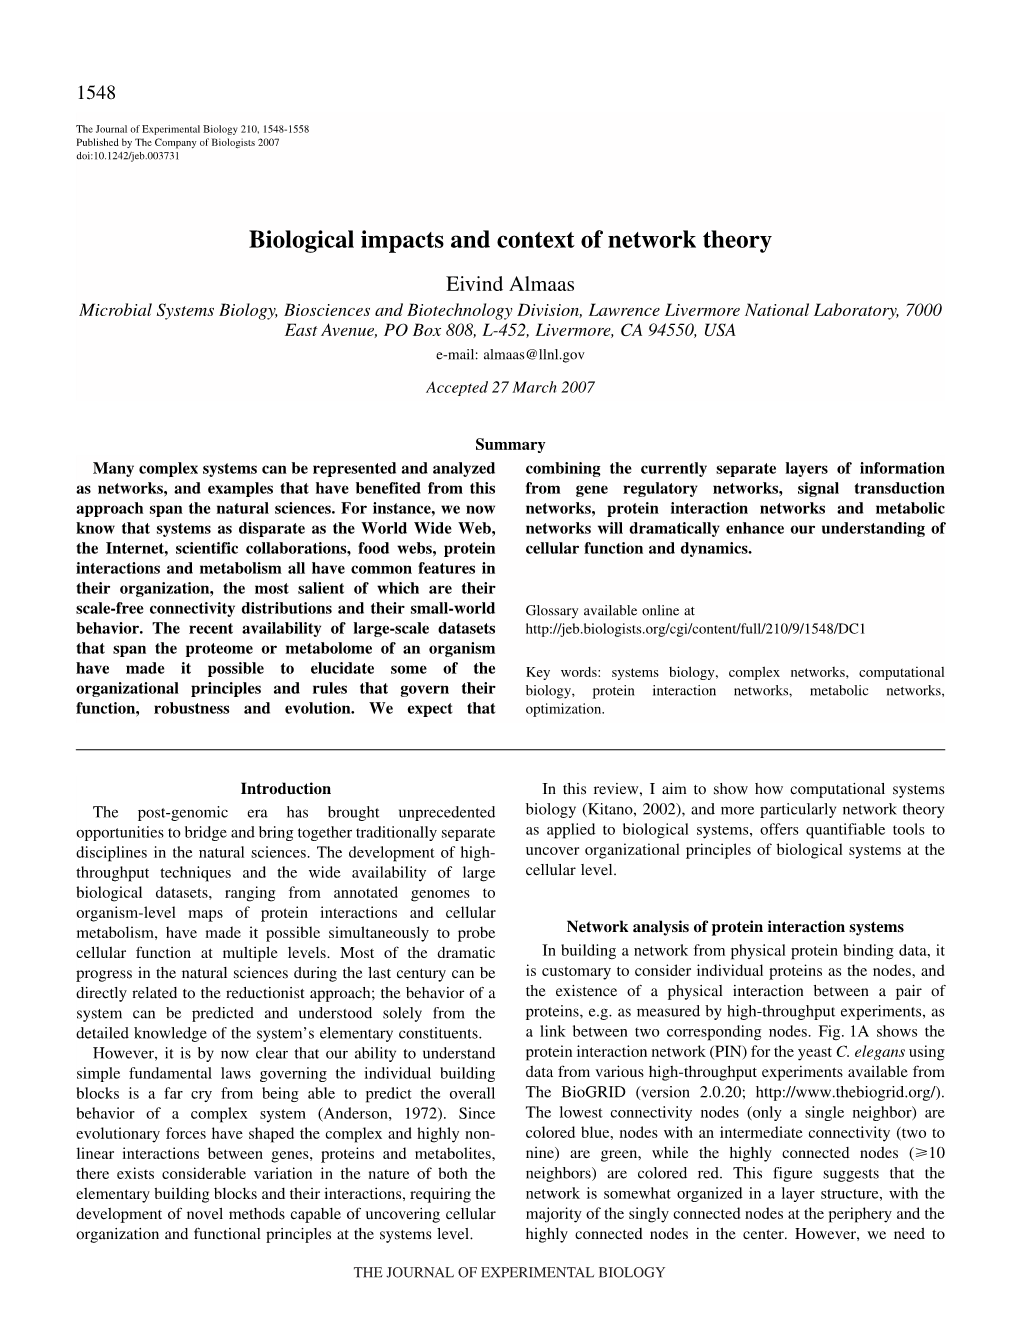 Biological Impacts and Context of Network Theory